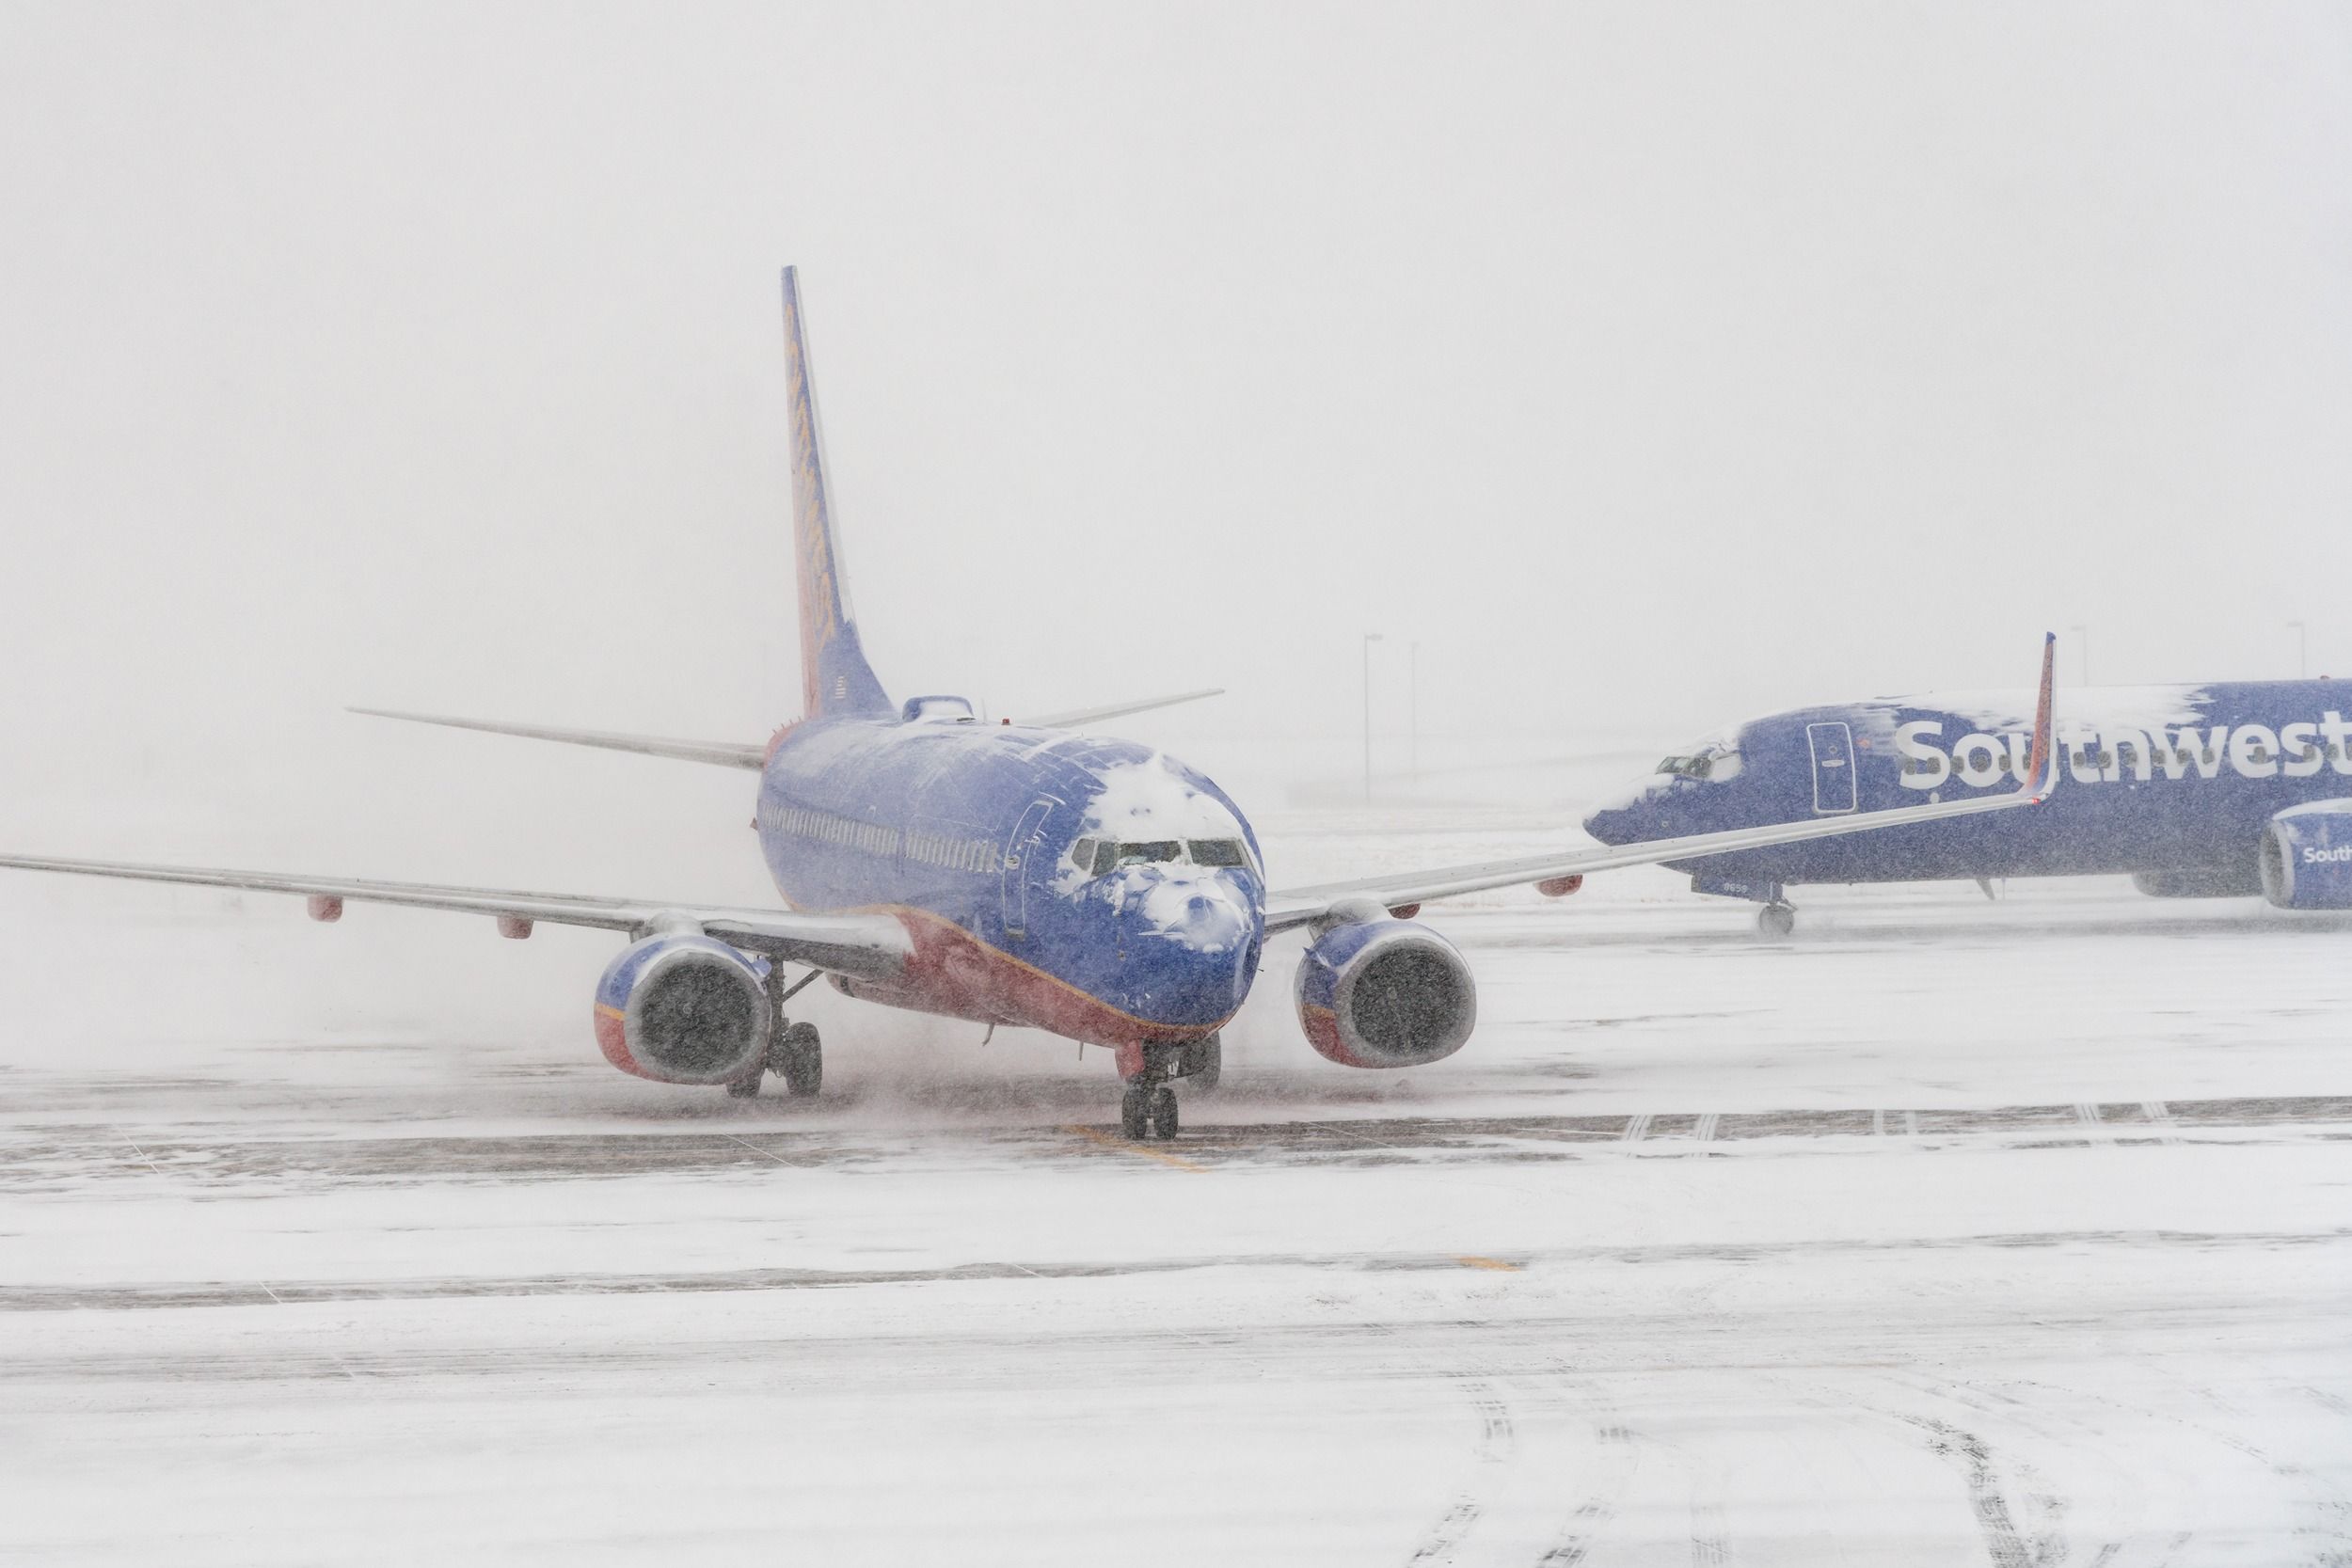 Southwest Airlines Boeing 737 aircraft during a snowstorm